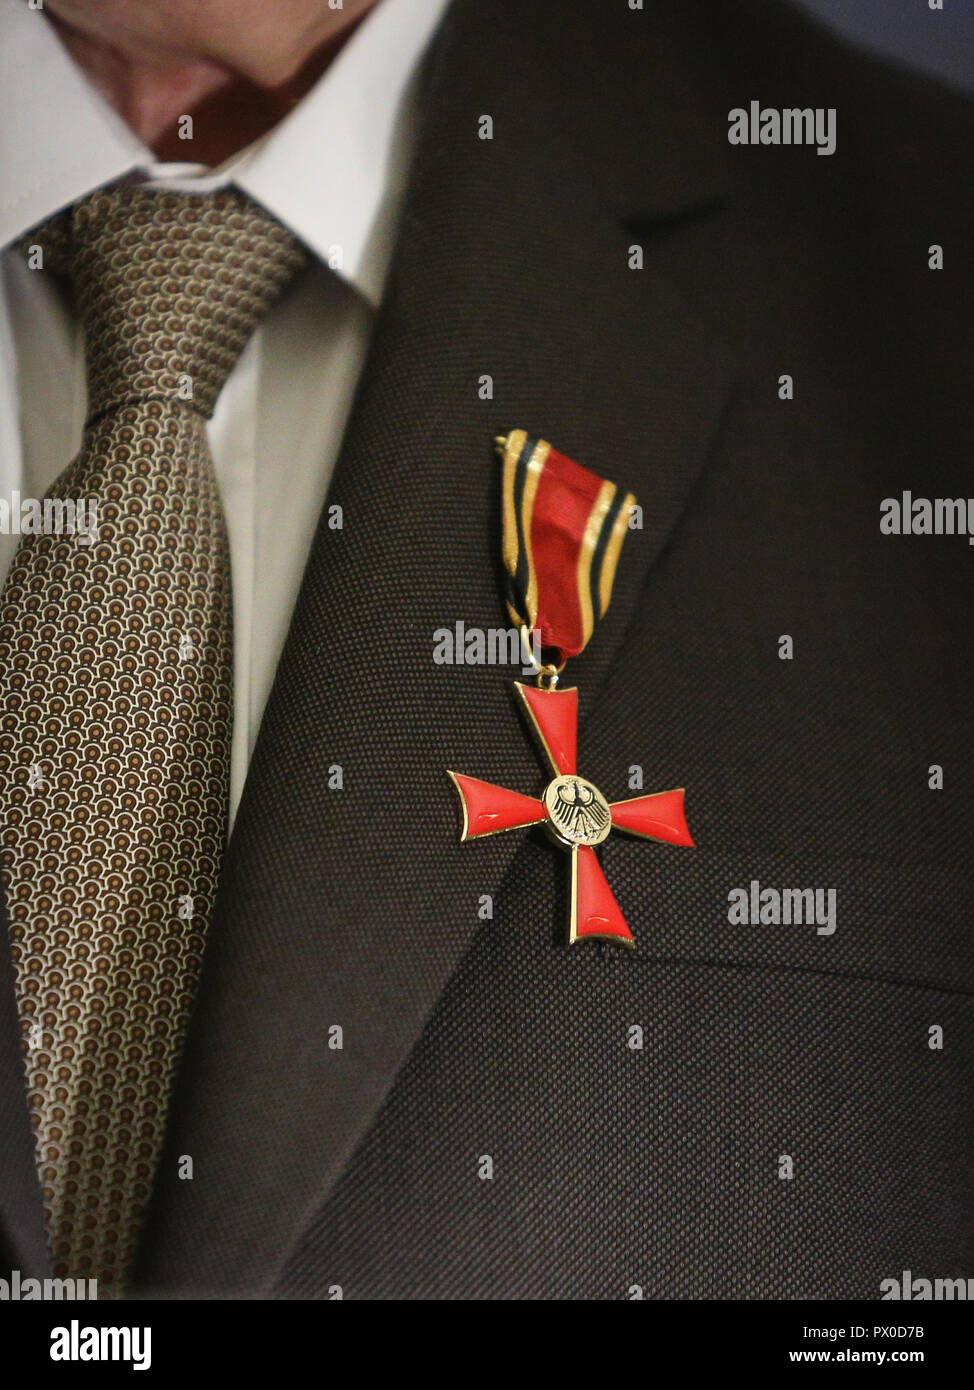 Details of a man holding a cross of Order of Merit of the Federal Republic of Germany during a speech Stock Photo